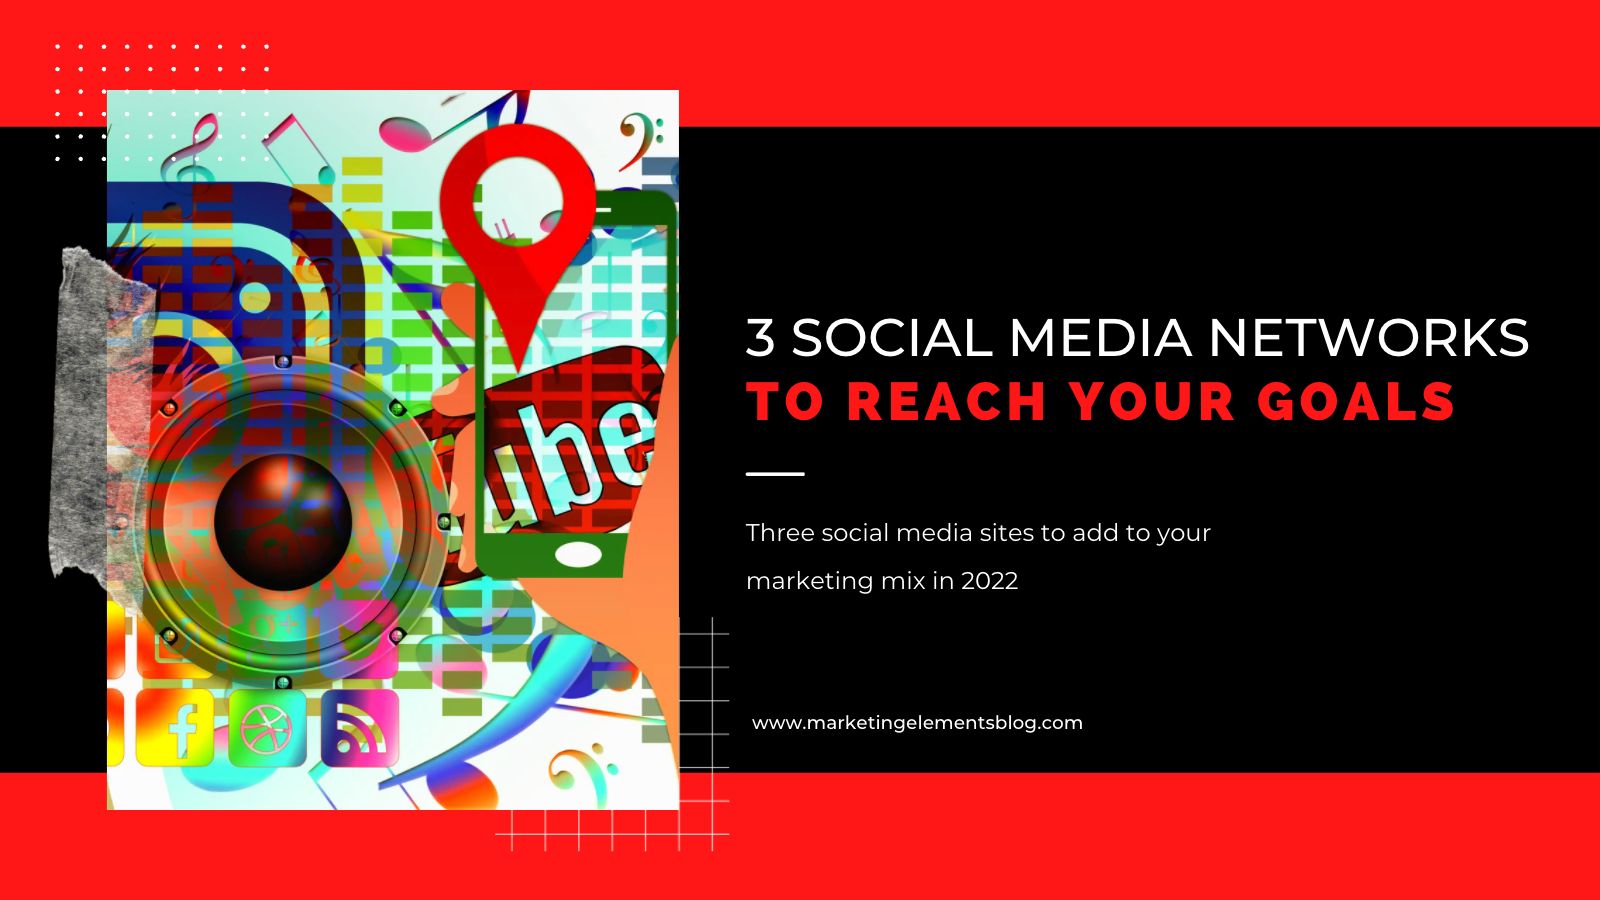 https://marketingelementsblog.com/2022/01/3-social-media-sites-to-reach-your-goals-and-not-who-you-think/